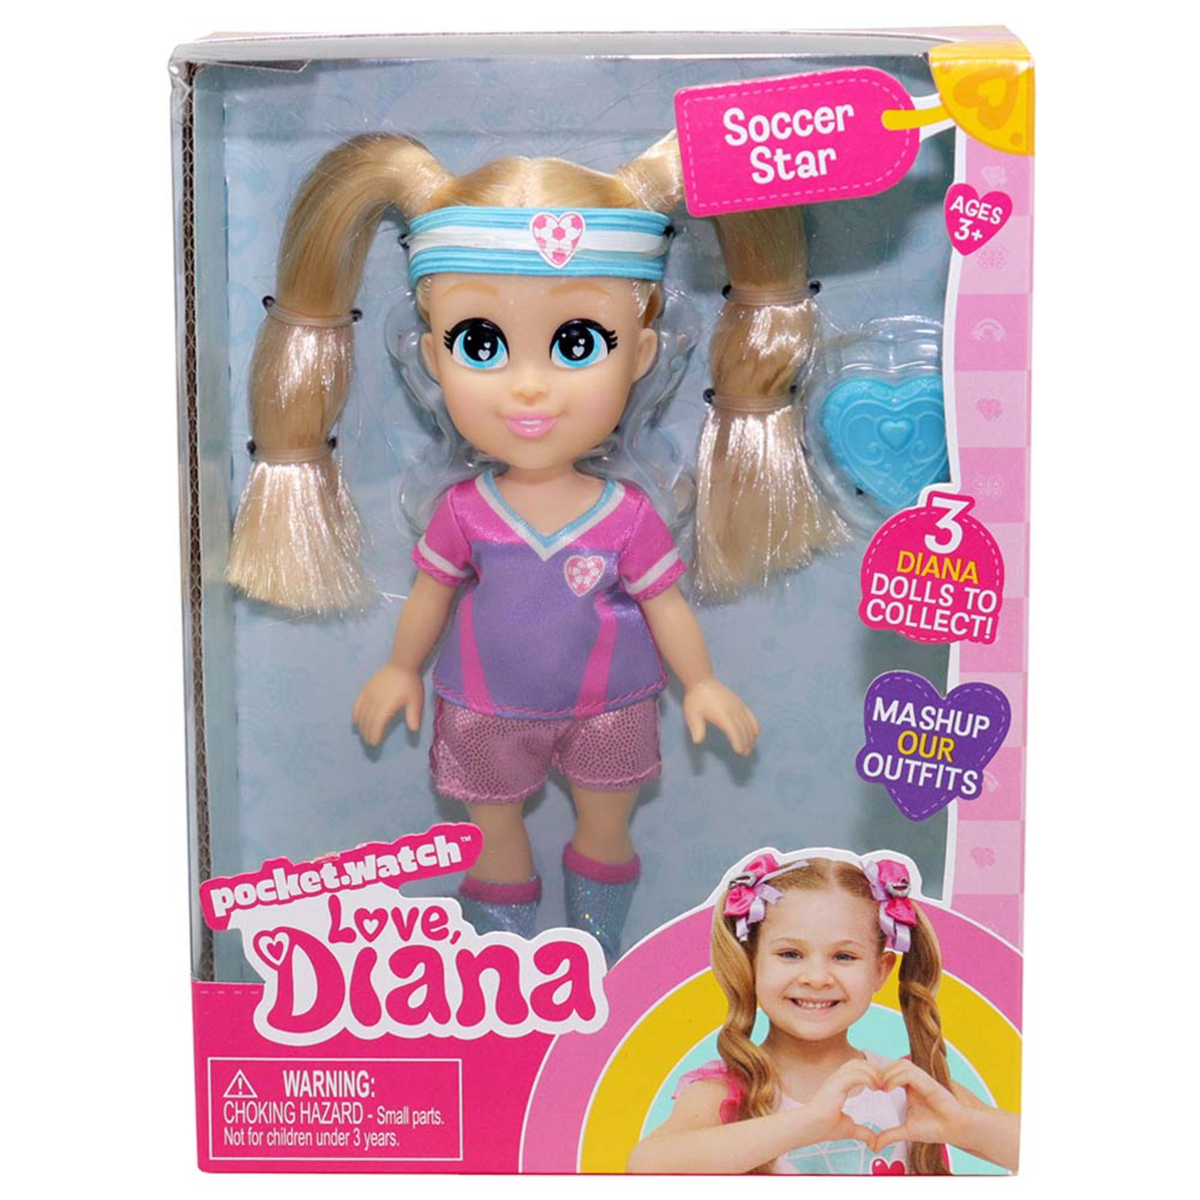 Love Diana Soccer Star Doll, 6 inches, Pink, 20517